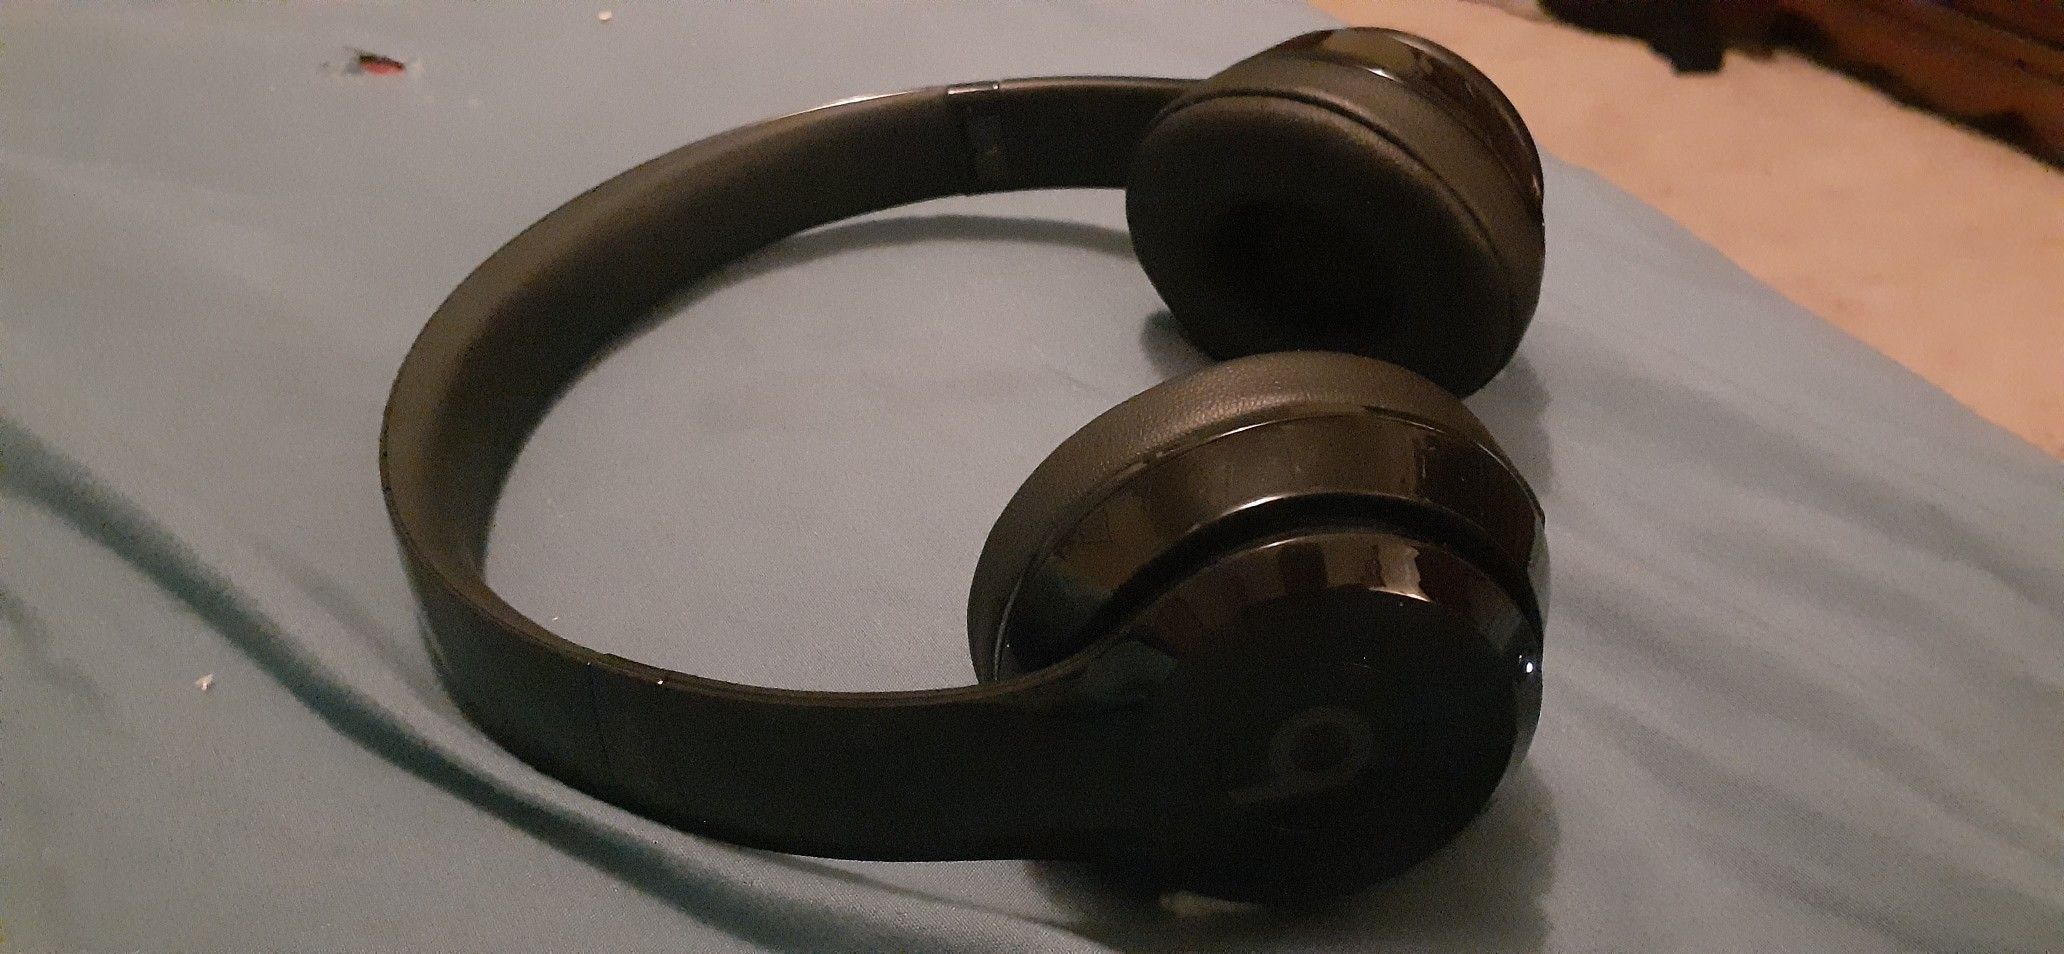 Beats Solo 3 wireless headphones made by Apple